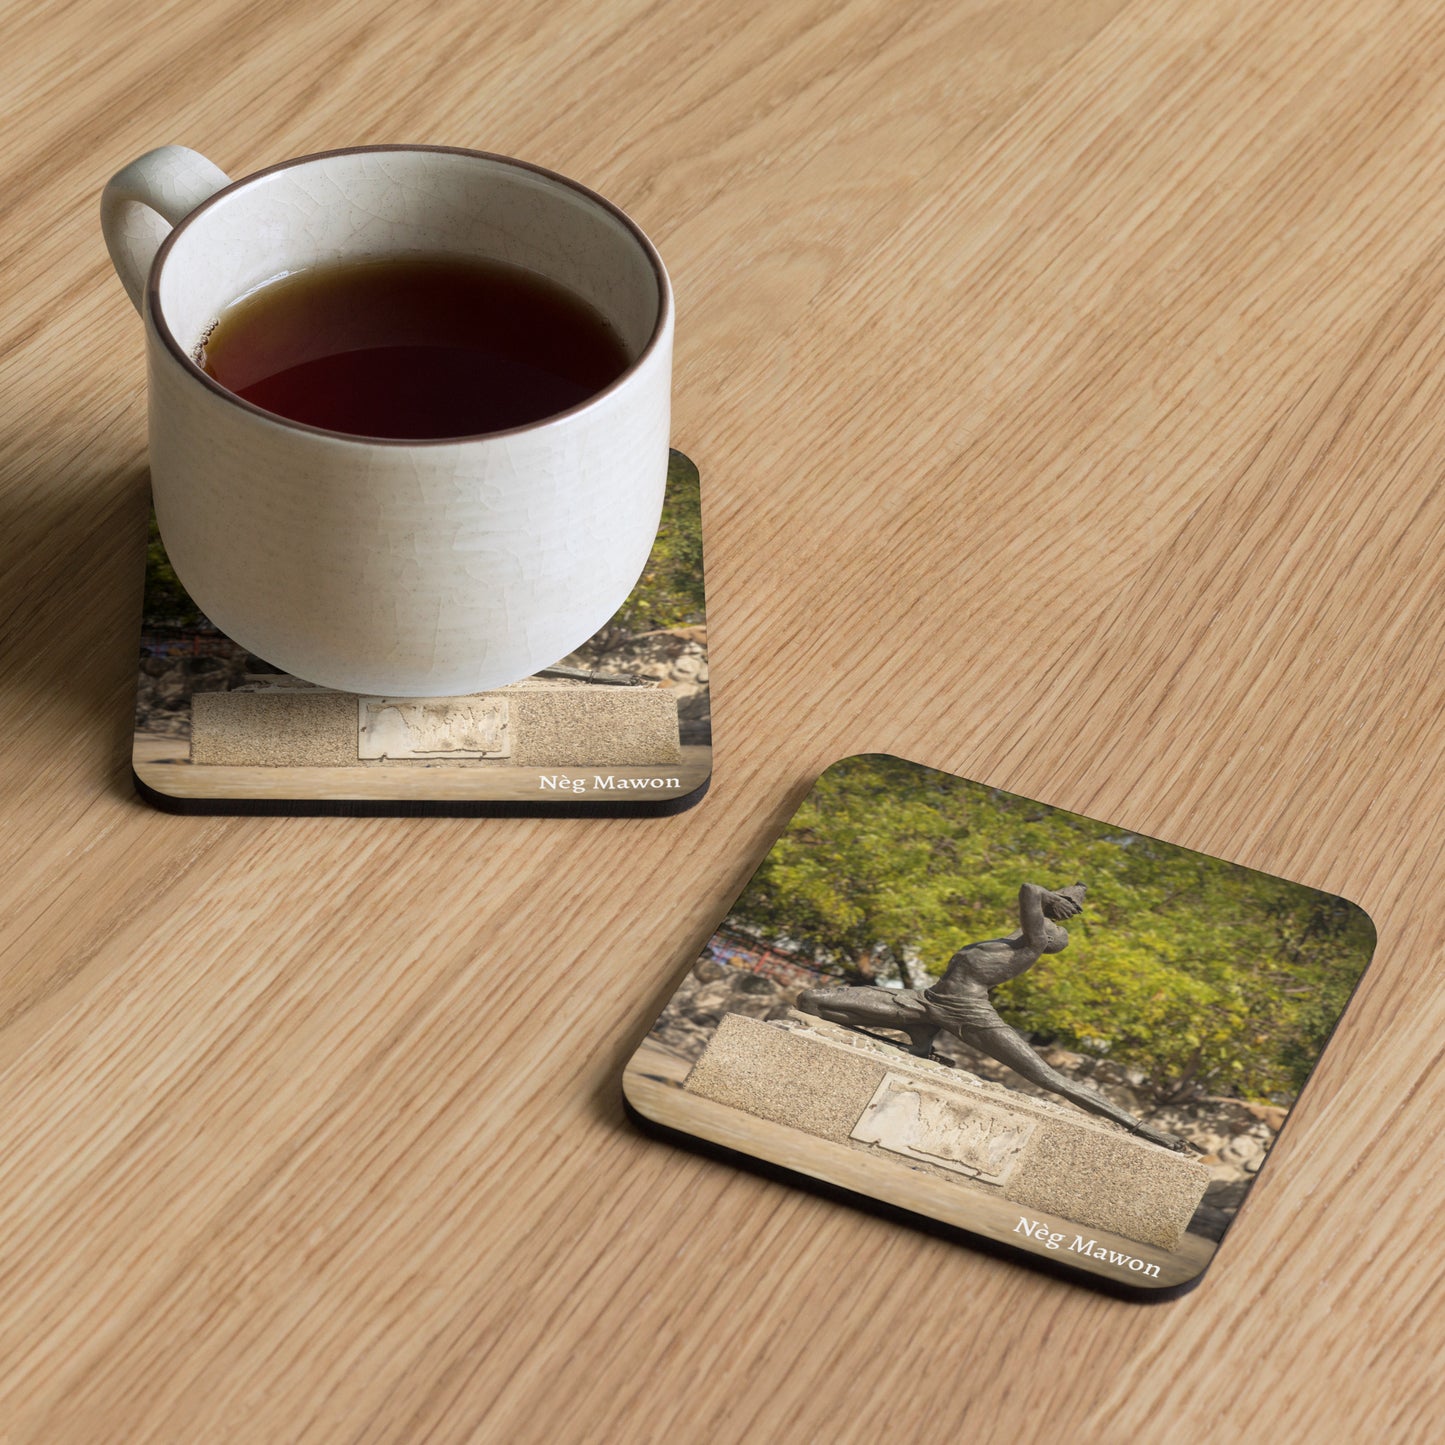  coaster-waterproof and heat-resistant-protecting- cork-back coaster